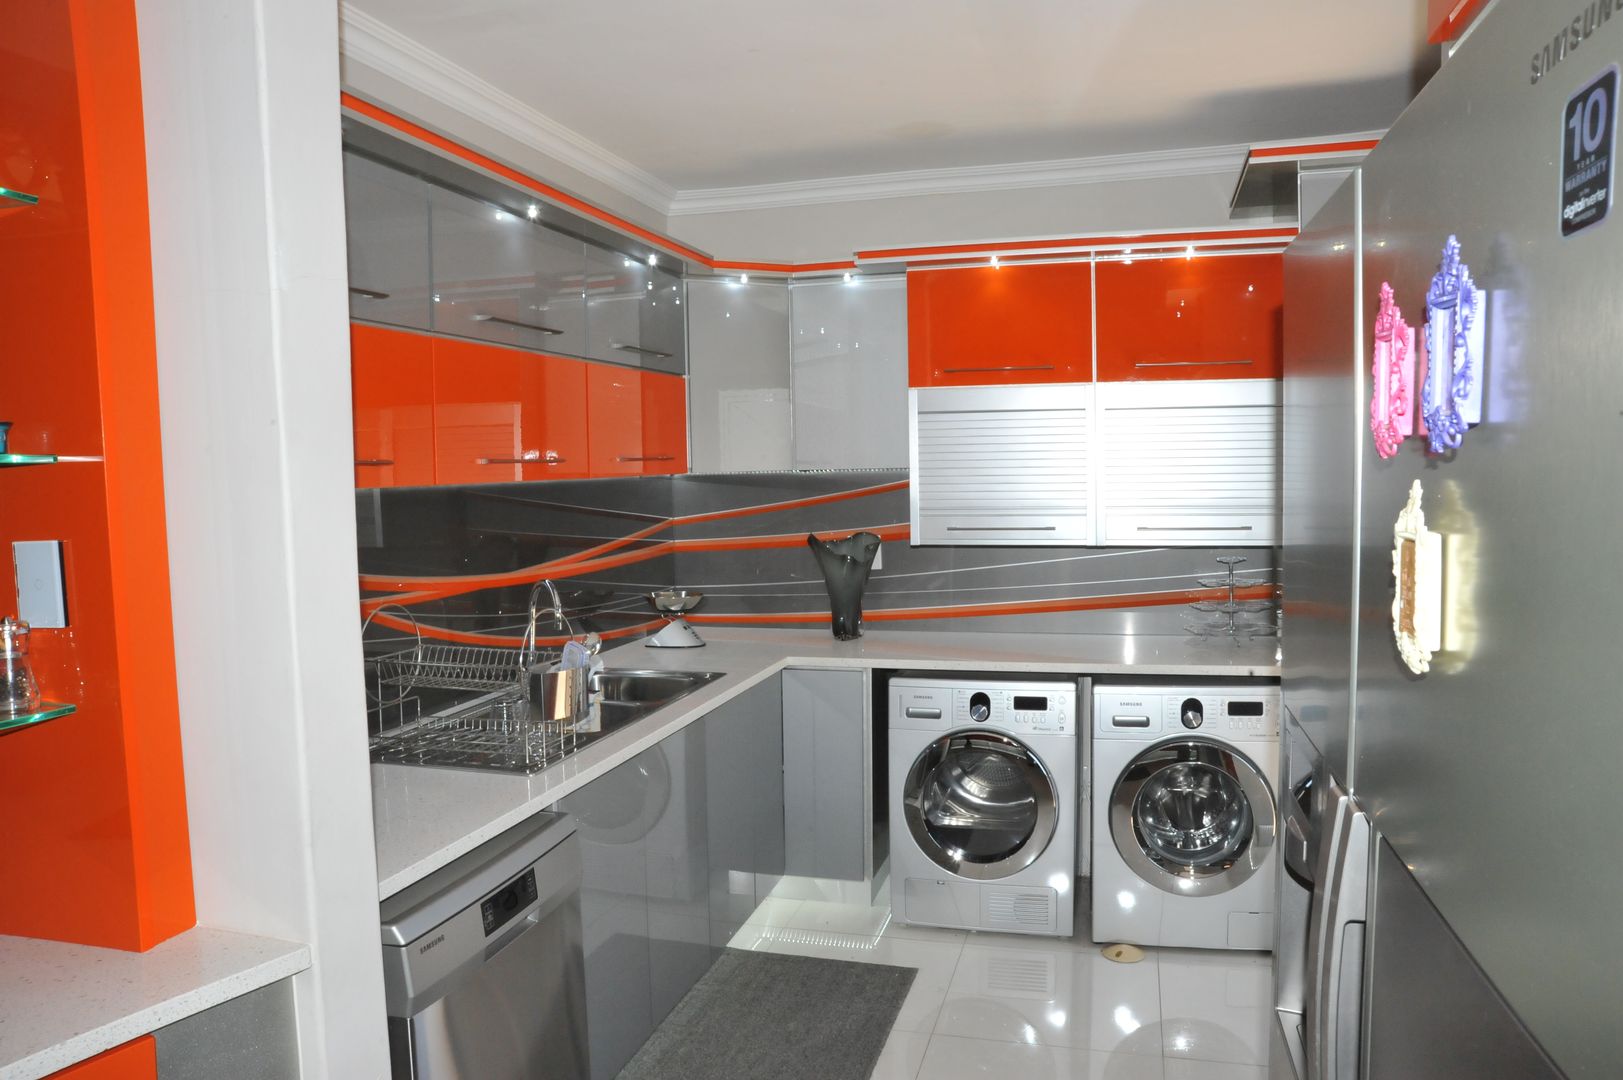 Orange and Silver Niemann Kitchen with Cesar Stone Work Tops., Expert Kitchens and Interiors Expert Kitchens and Interiors Cozinhas modernas